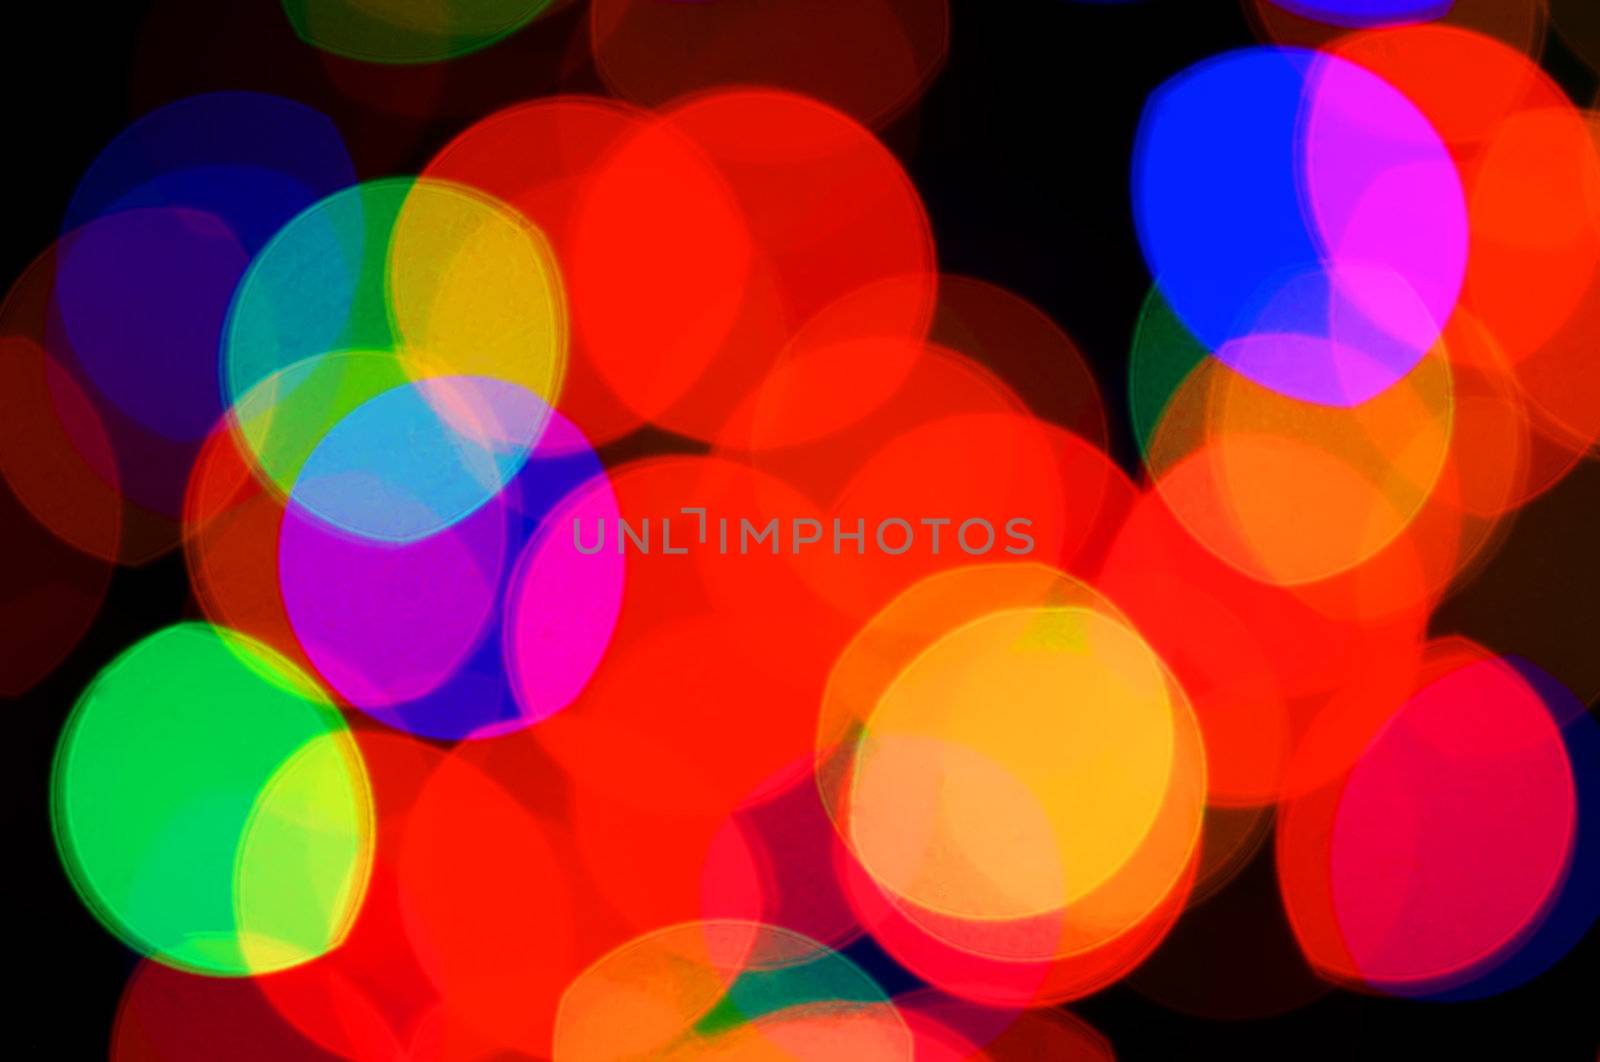 Image of colorful out of focus Christmas lights